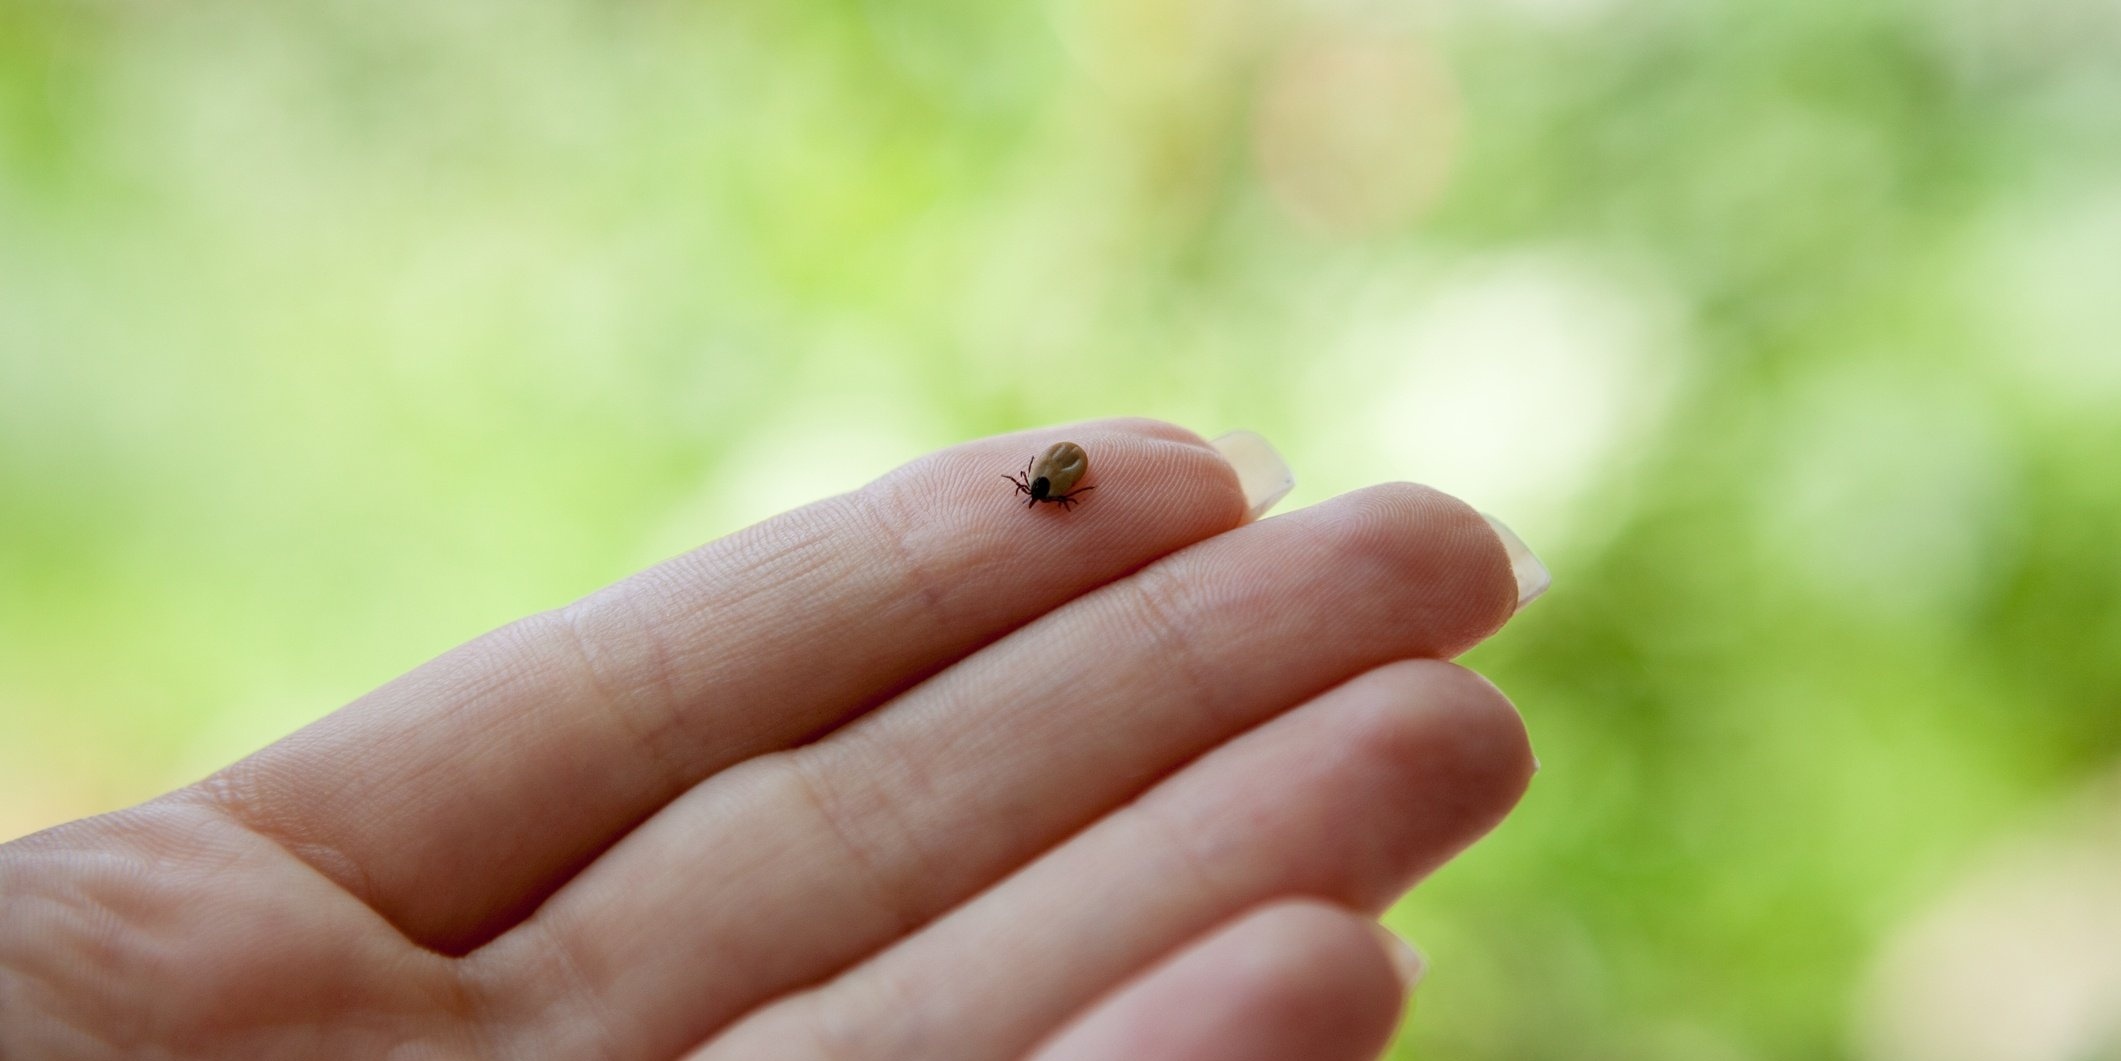 Ticks do not have wings, and cannot fly or Jump.